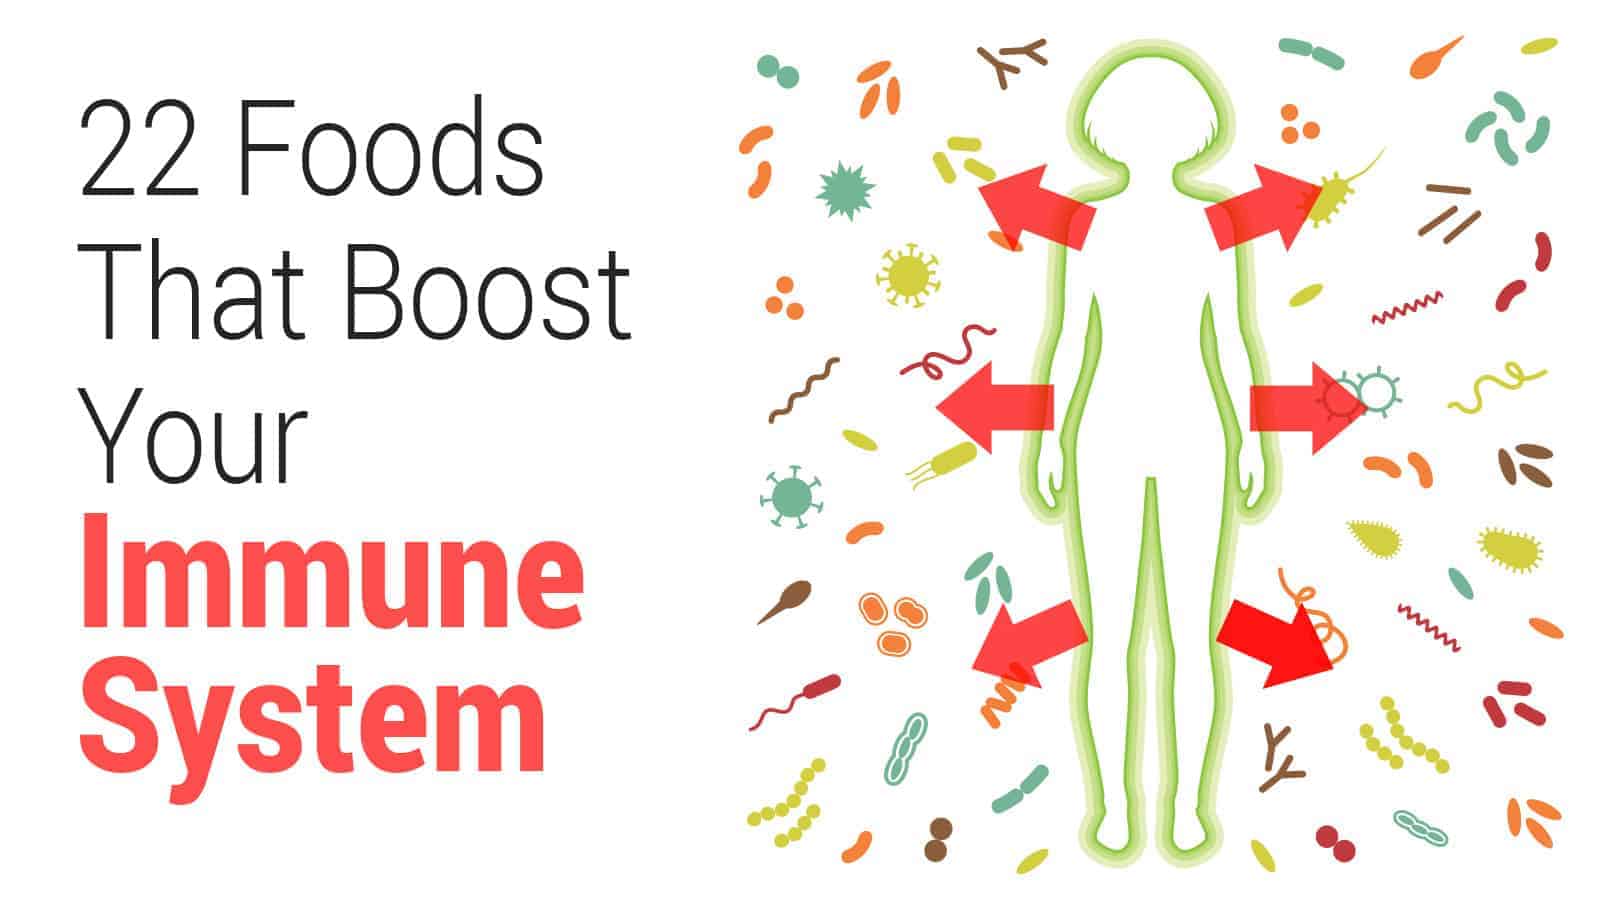 22 Foods That Boost Your Immune System